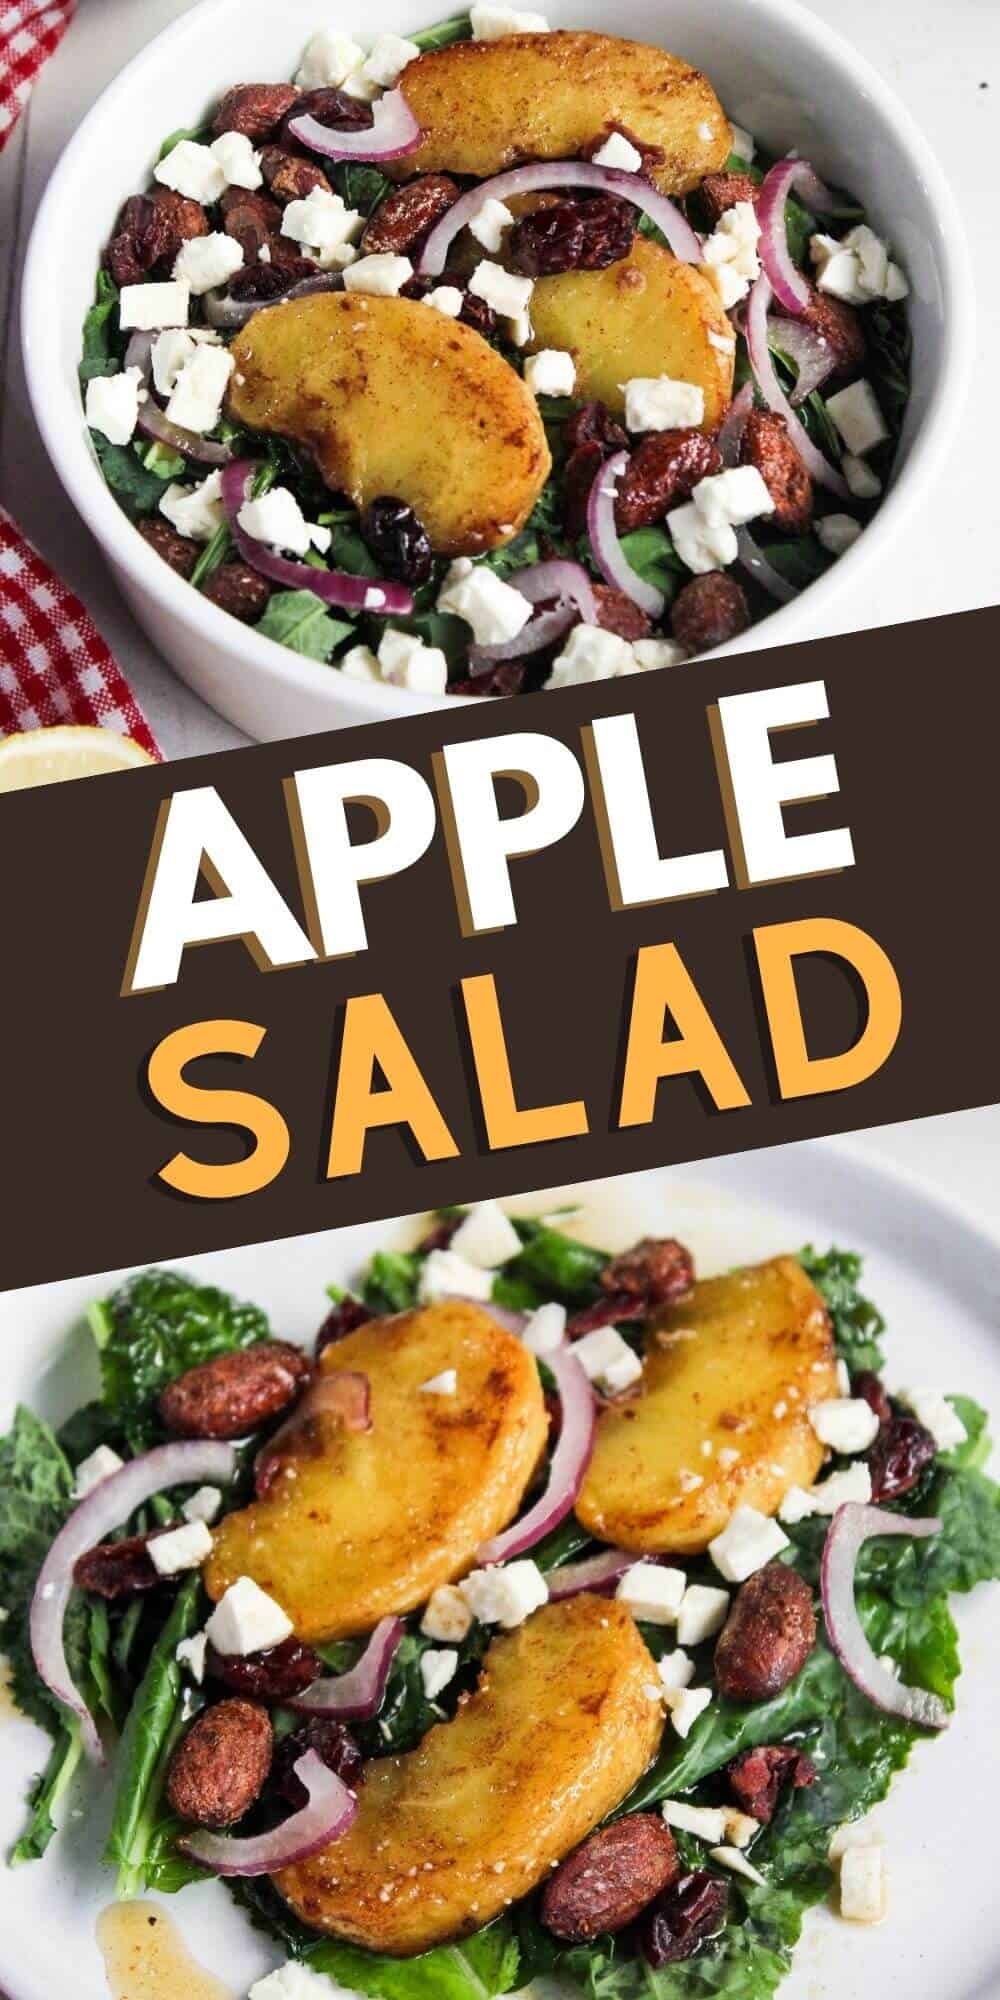 Apple salad in a white bowl with kale and onions.